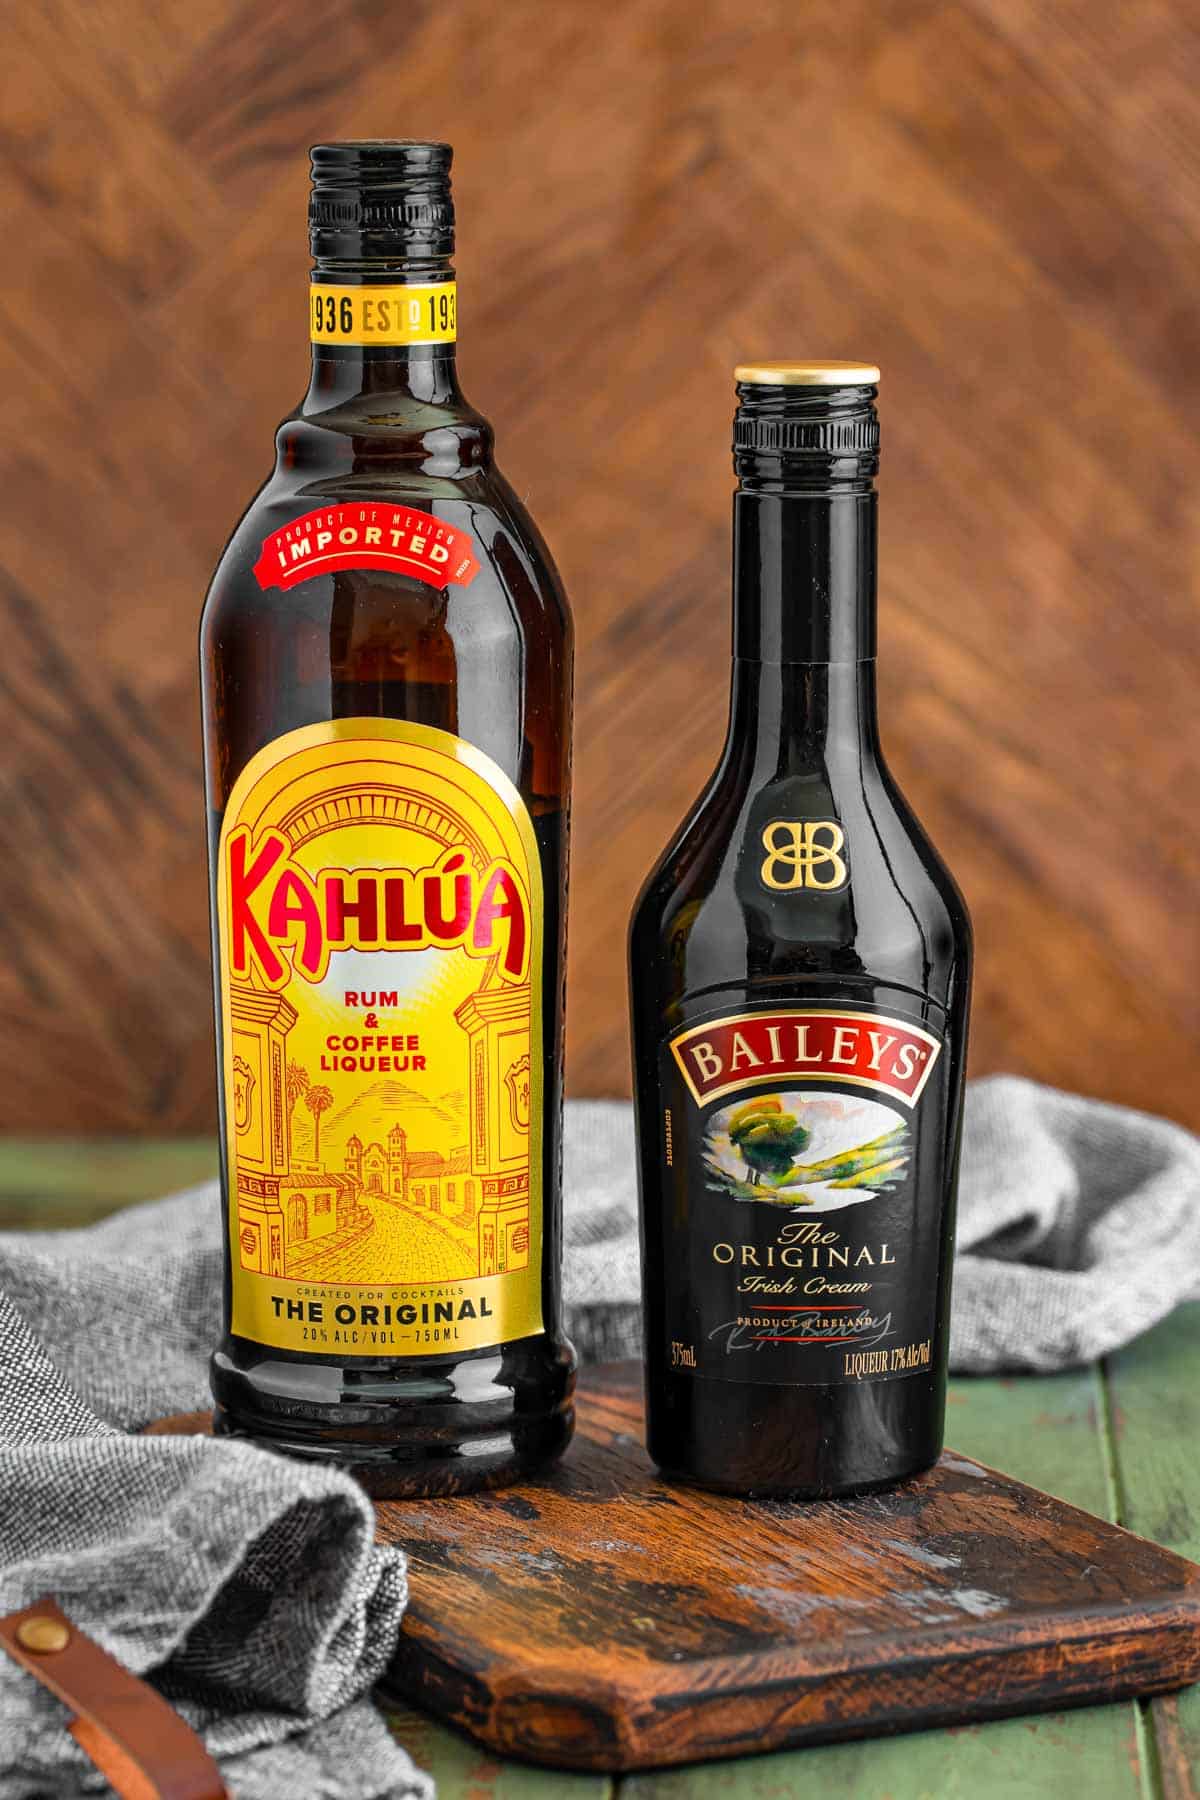 Bottles of Kahlua and Bailey's on a wooden serving board.